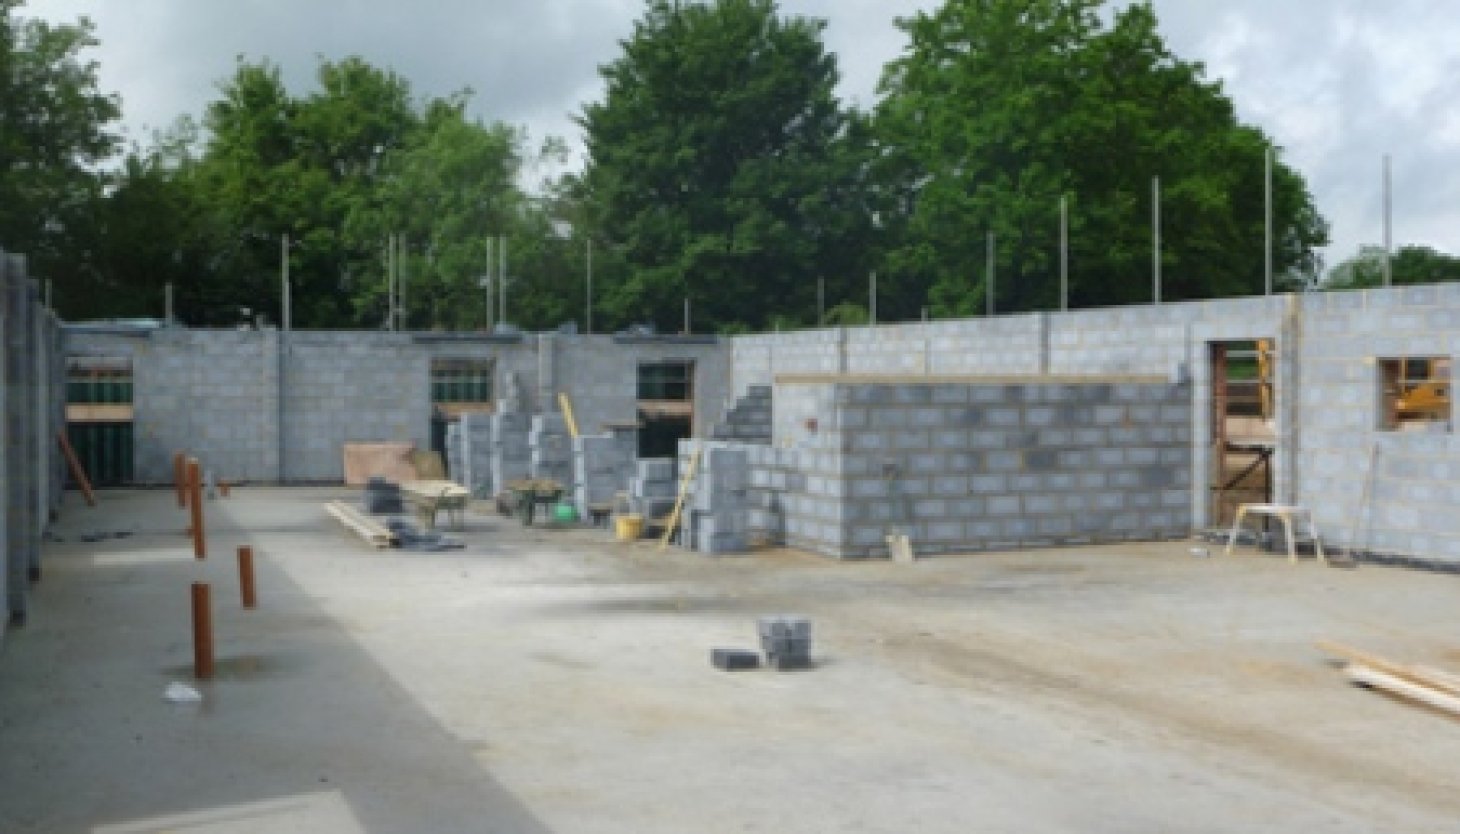 H+H supplies community project with its Celcon Blocks